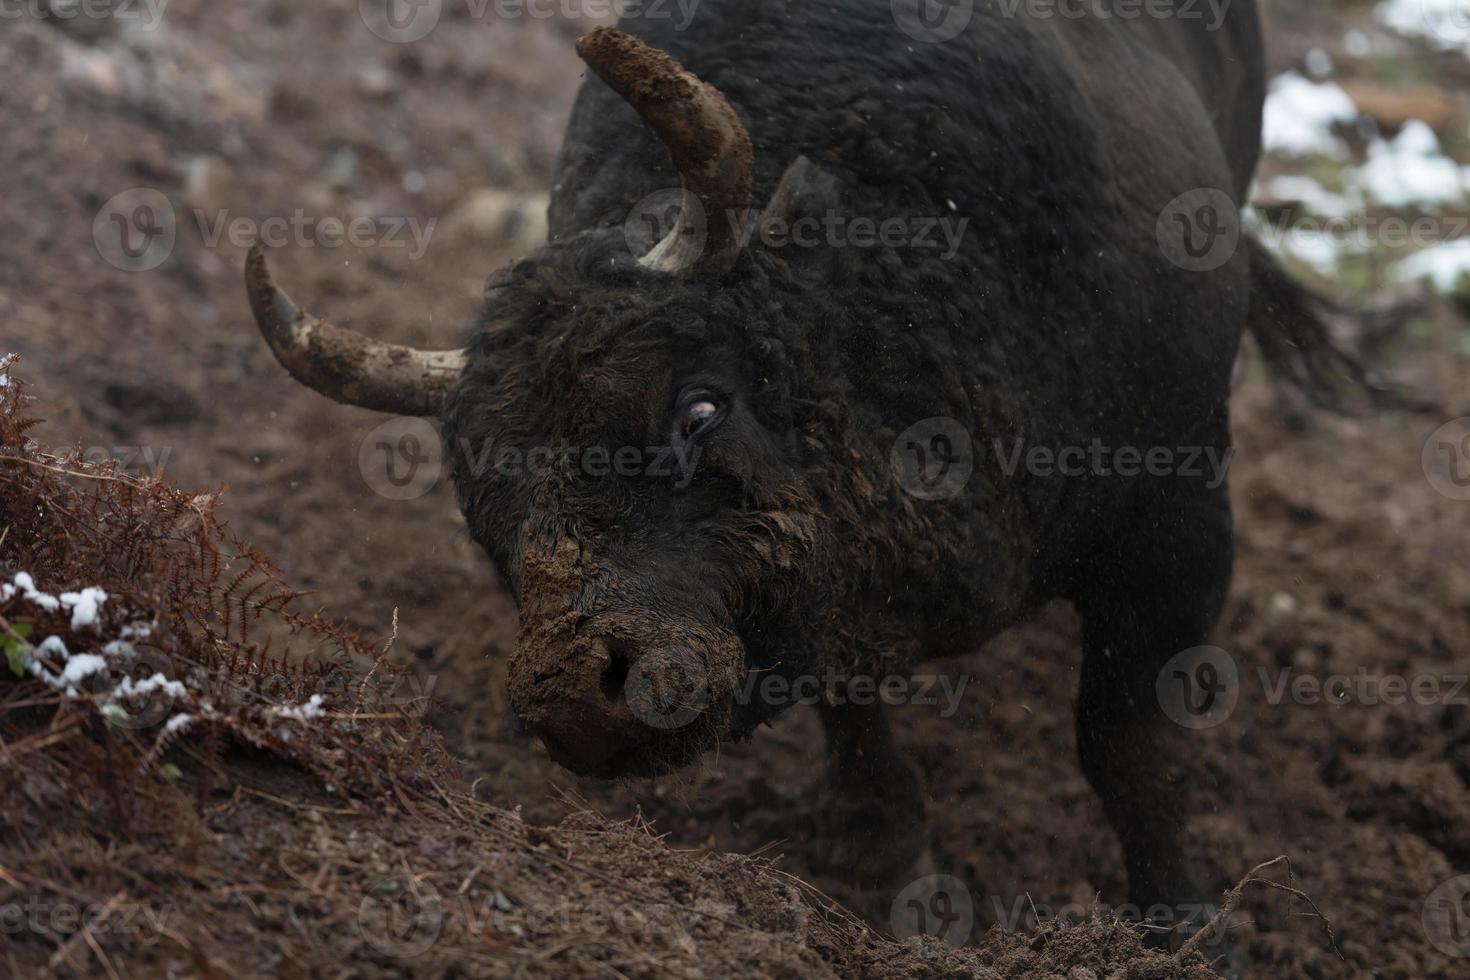 A big black bull stabs its horns into the snowy ground and trains to fight in the arena. The concept of bullfighting. Selective focus photo